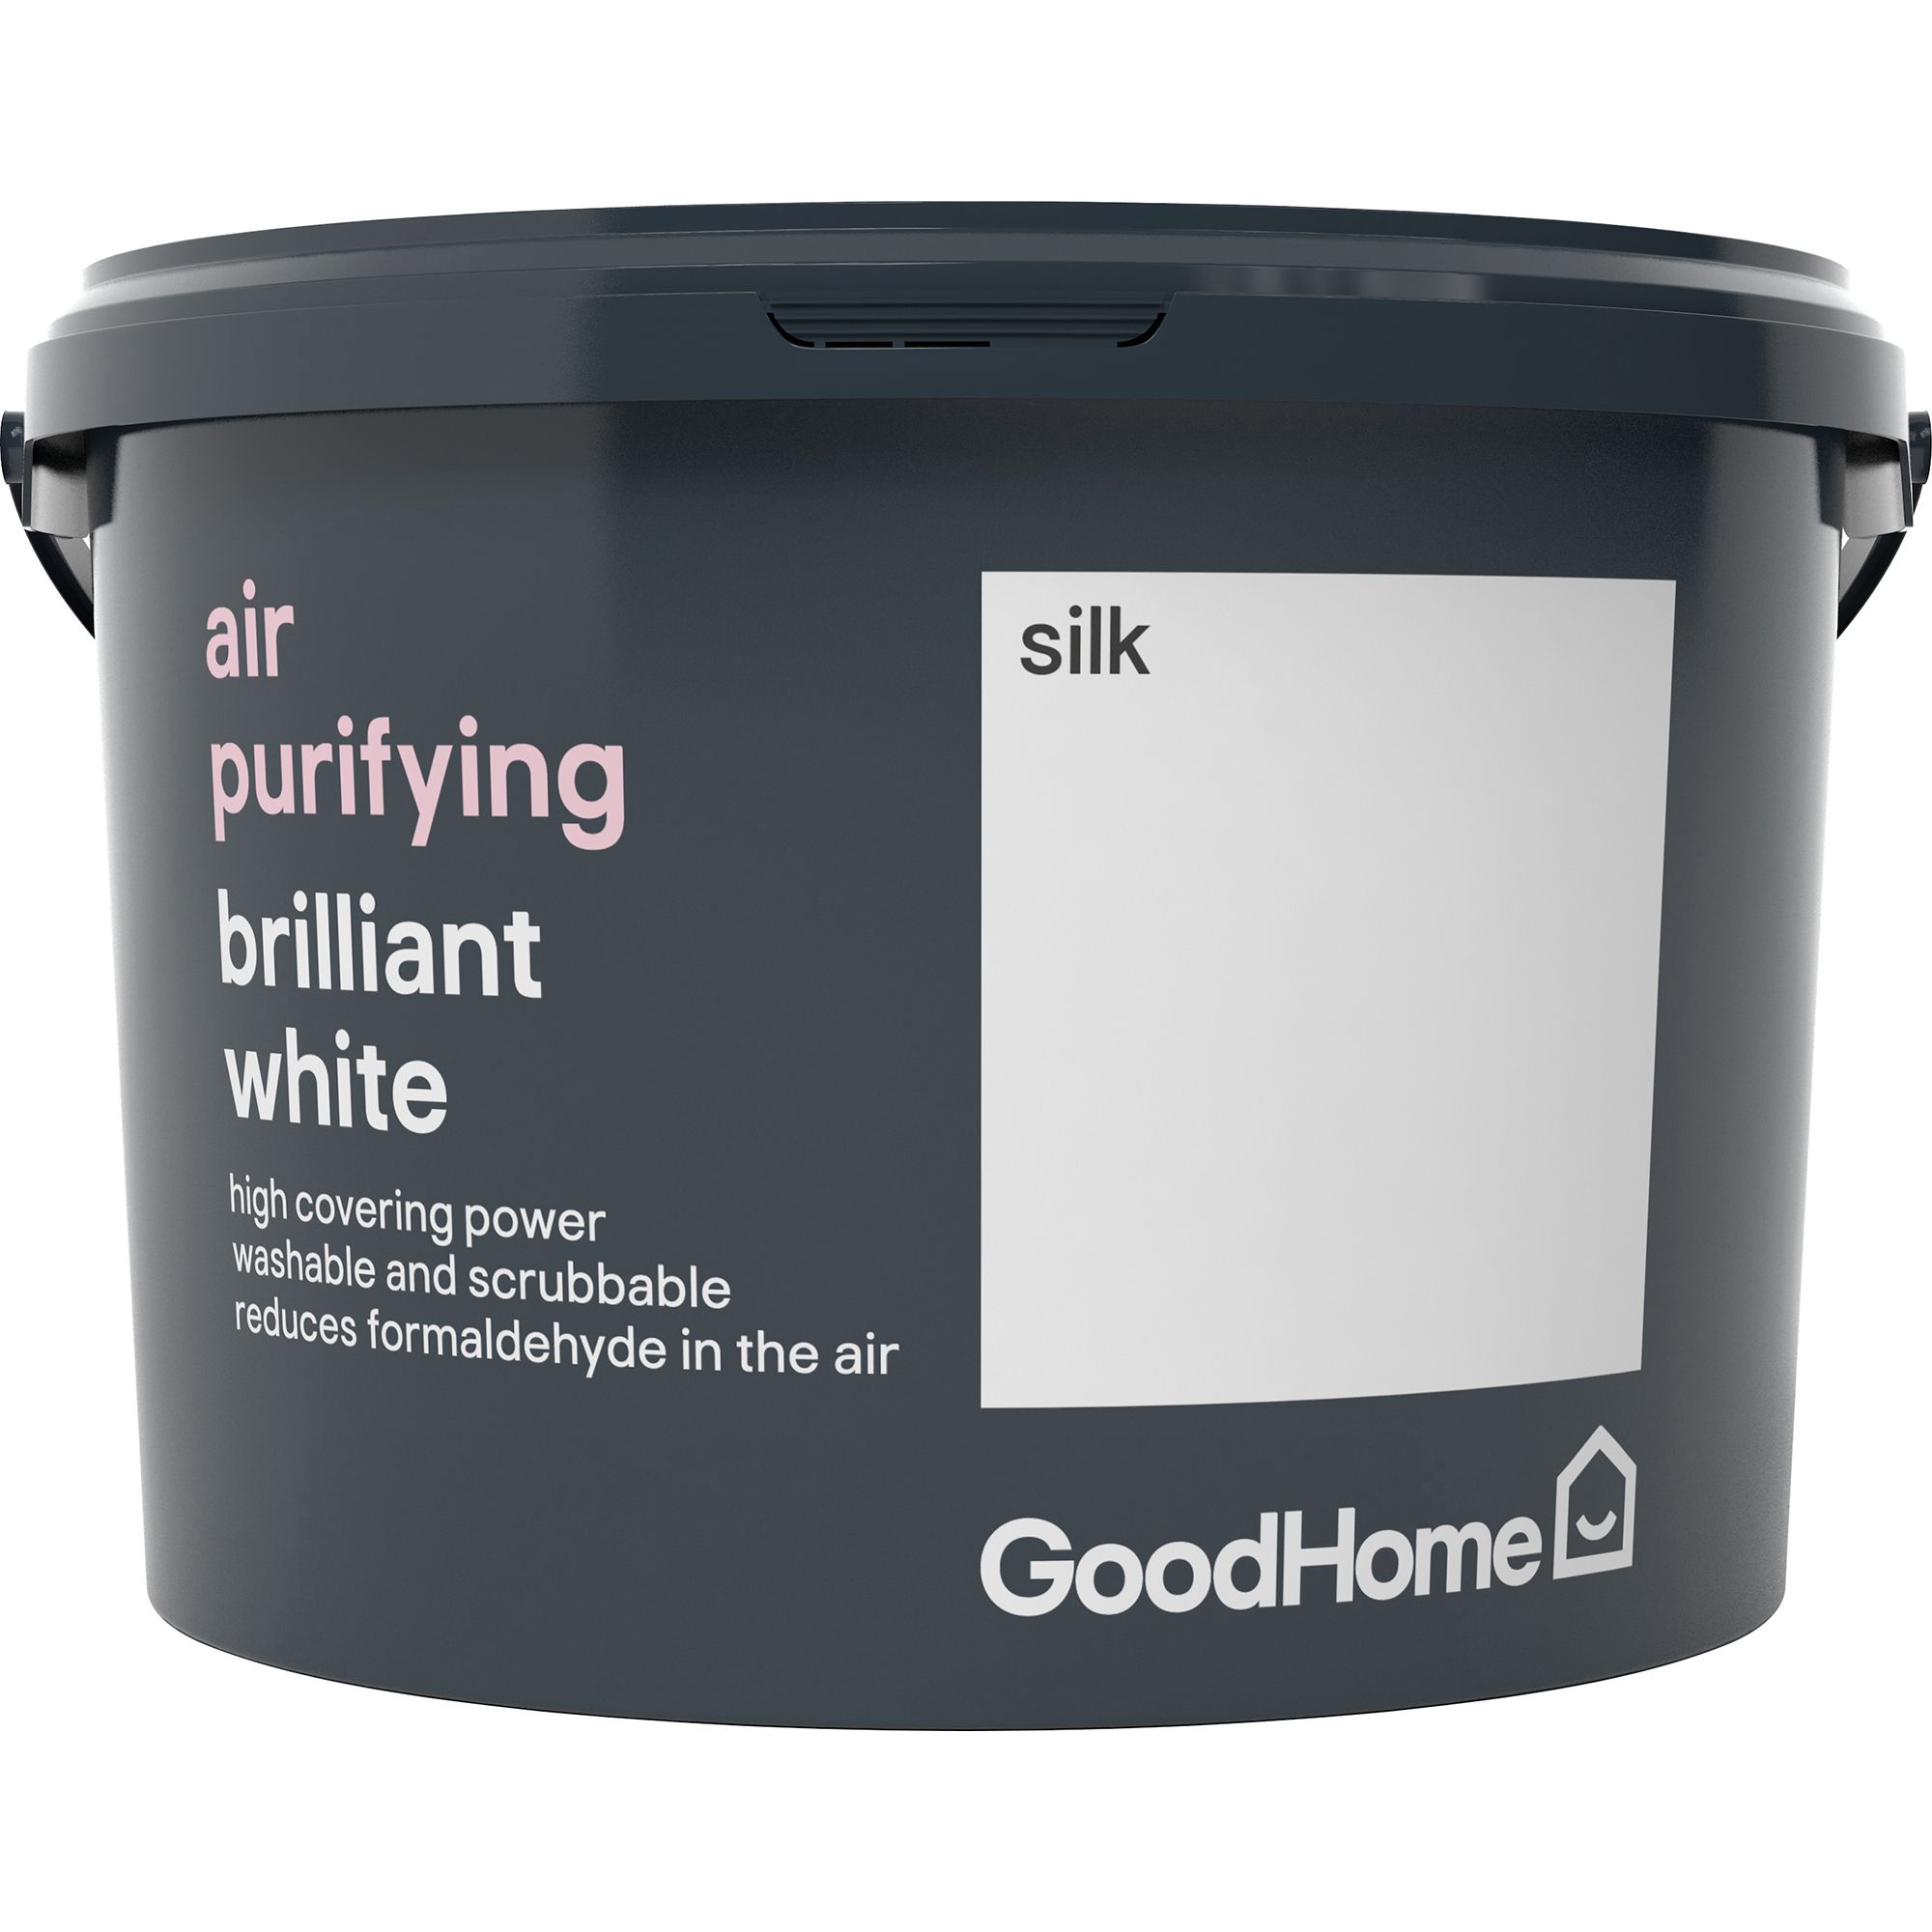 GoodHome Air purifying Brilliant white Silk Emulsion paint, 2.5L